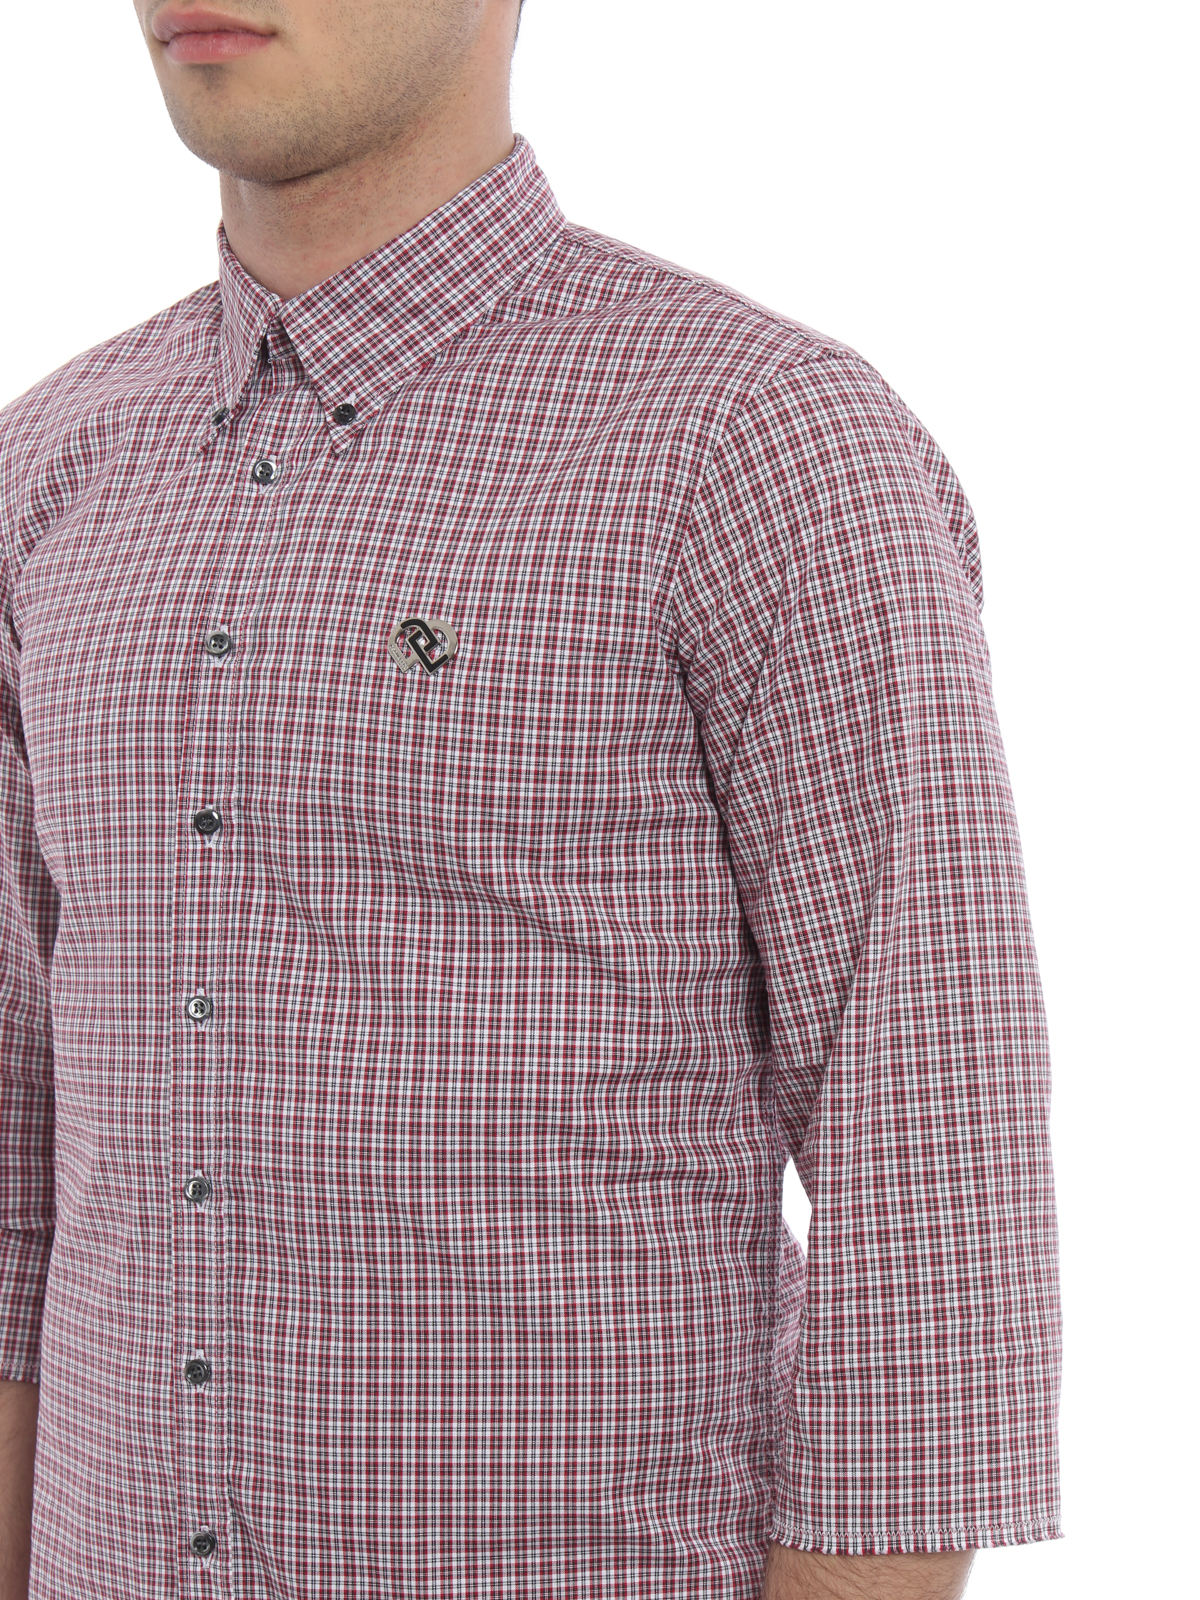 dsquared2 checked shirt